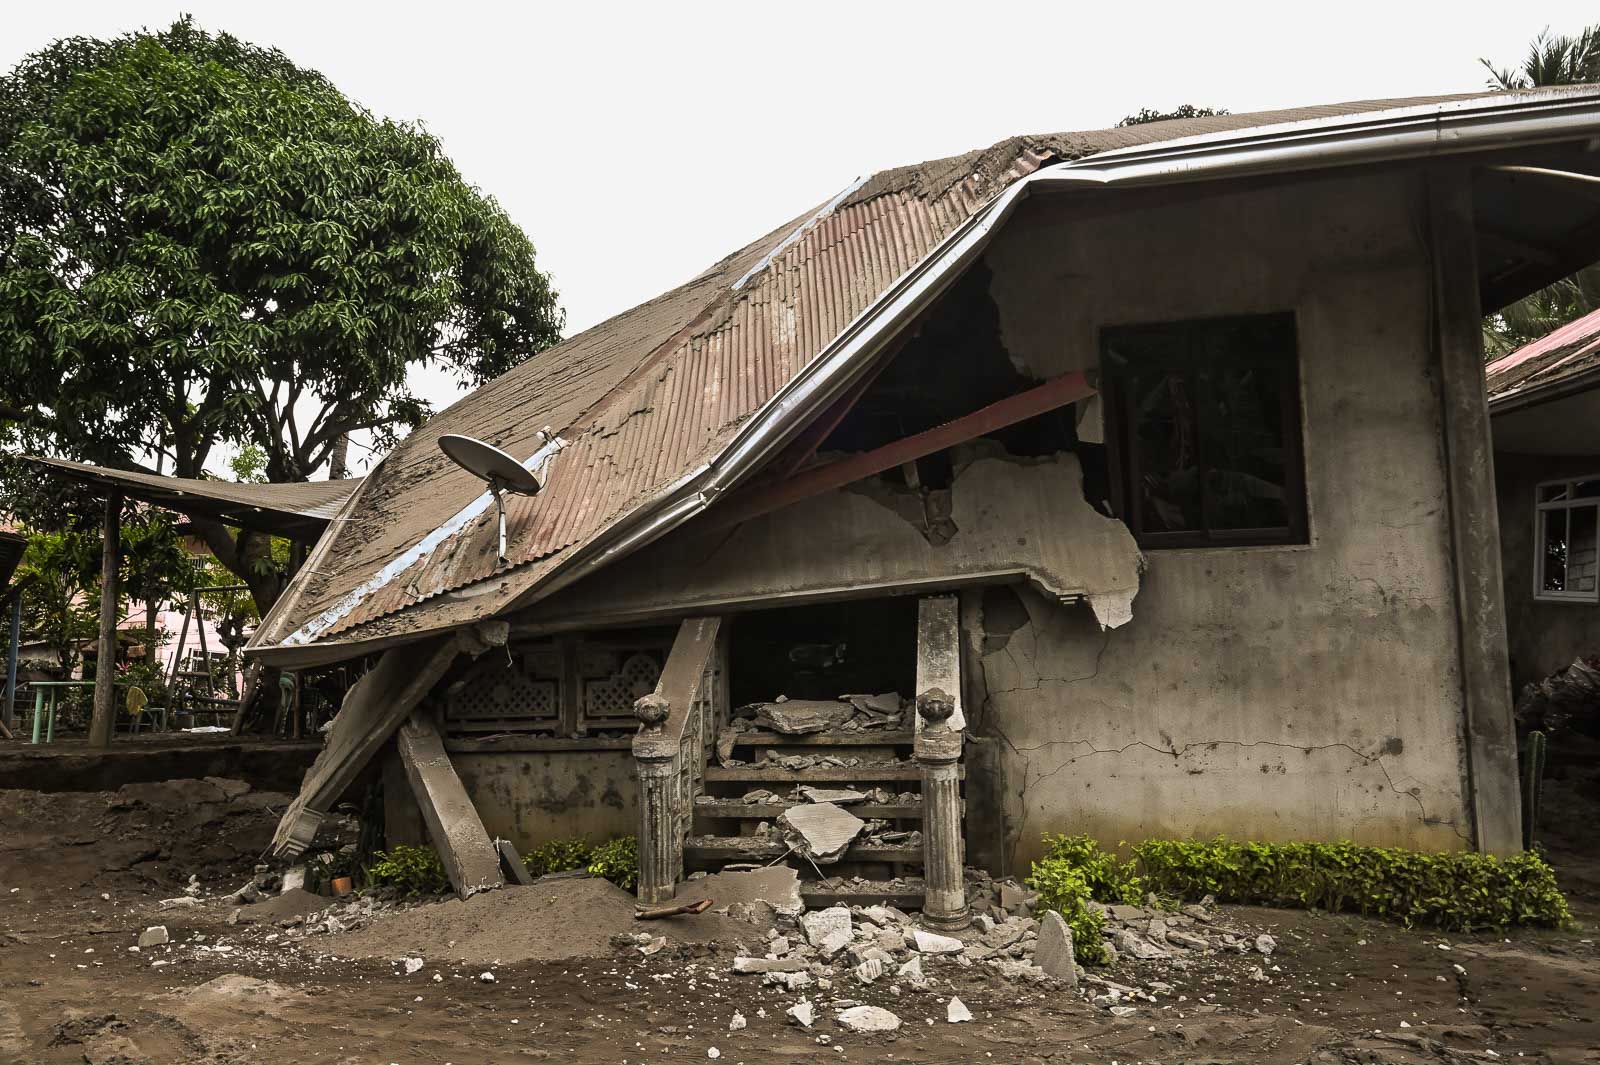 DAMAGED. Fissures cause major damage to roads, houses, and establishments in Barangay San Teodoro in Agoncillo, Batangas, on January 14, 2020. Photo by Alecs Ongcal/Rappler 